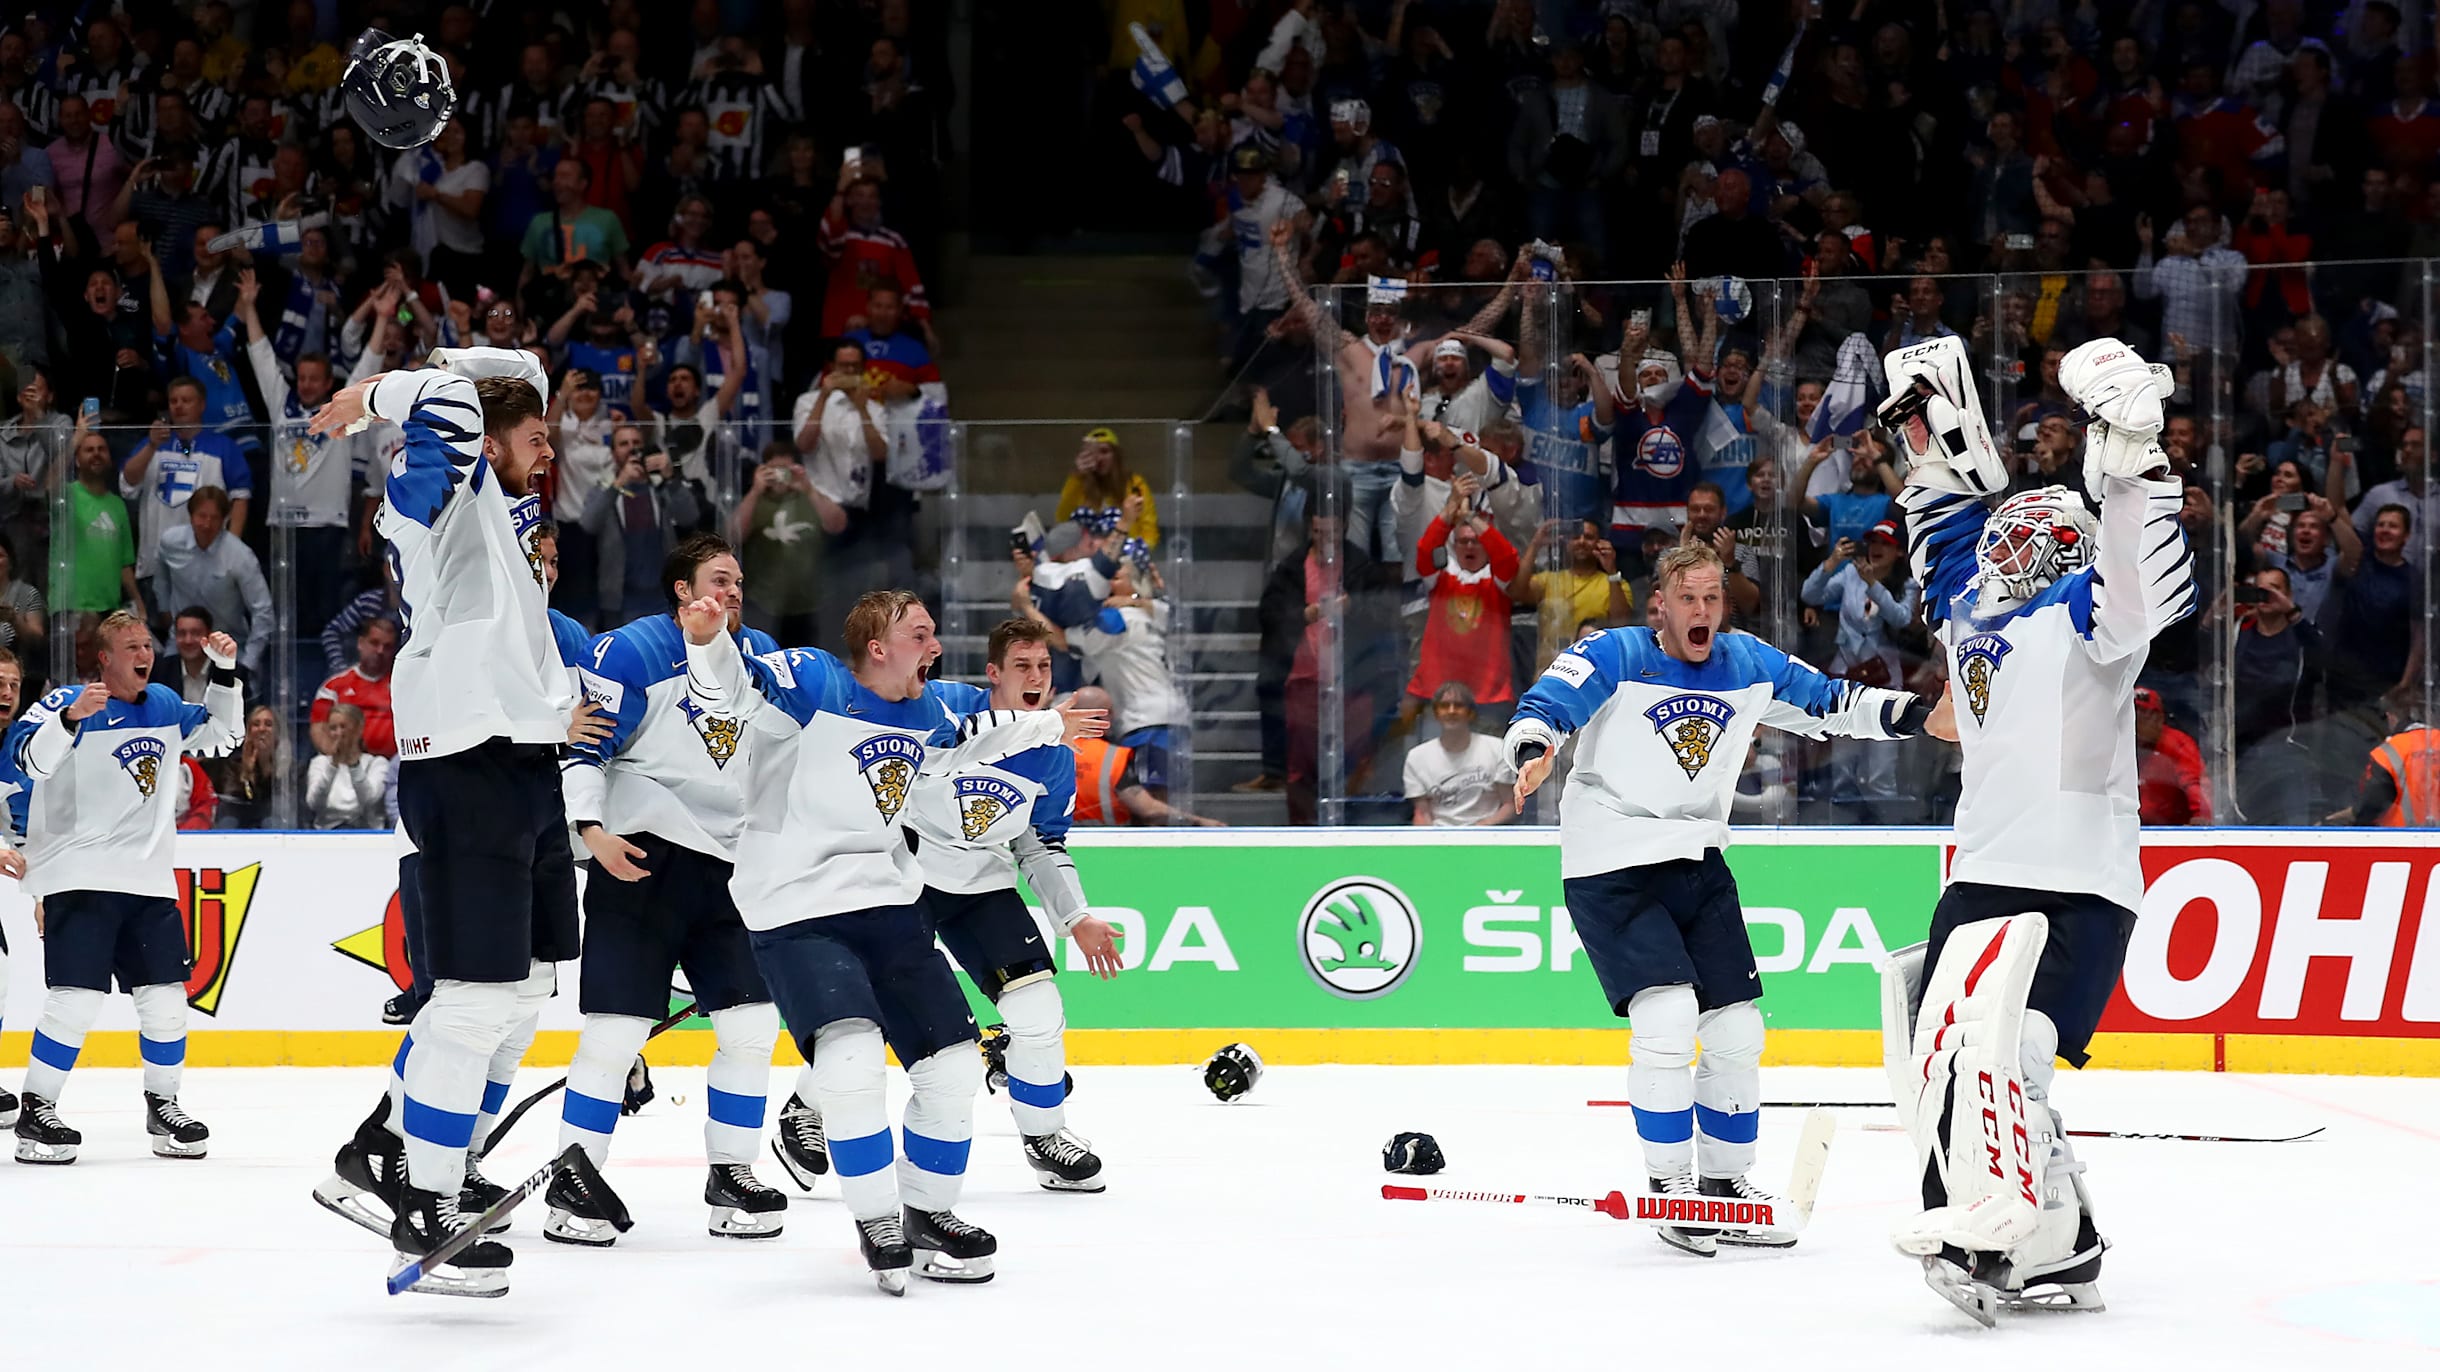 Five Capitals to Participate in 2019 IIHF World Championship